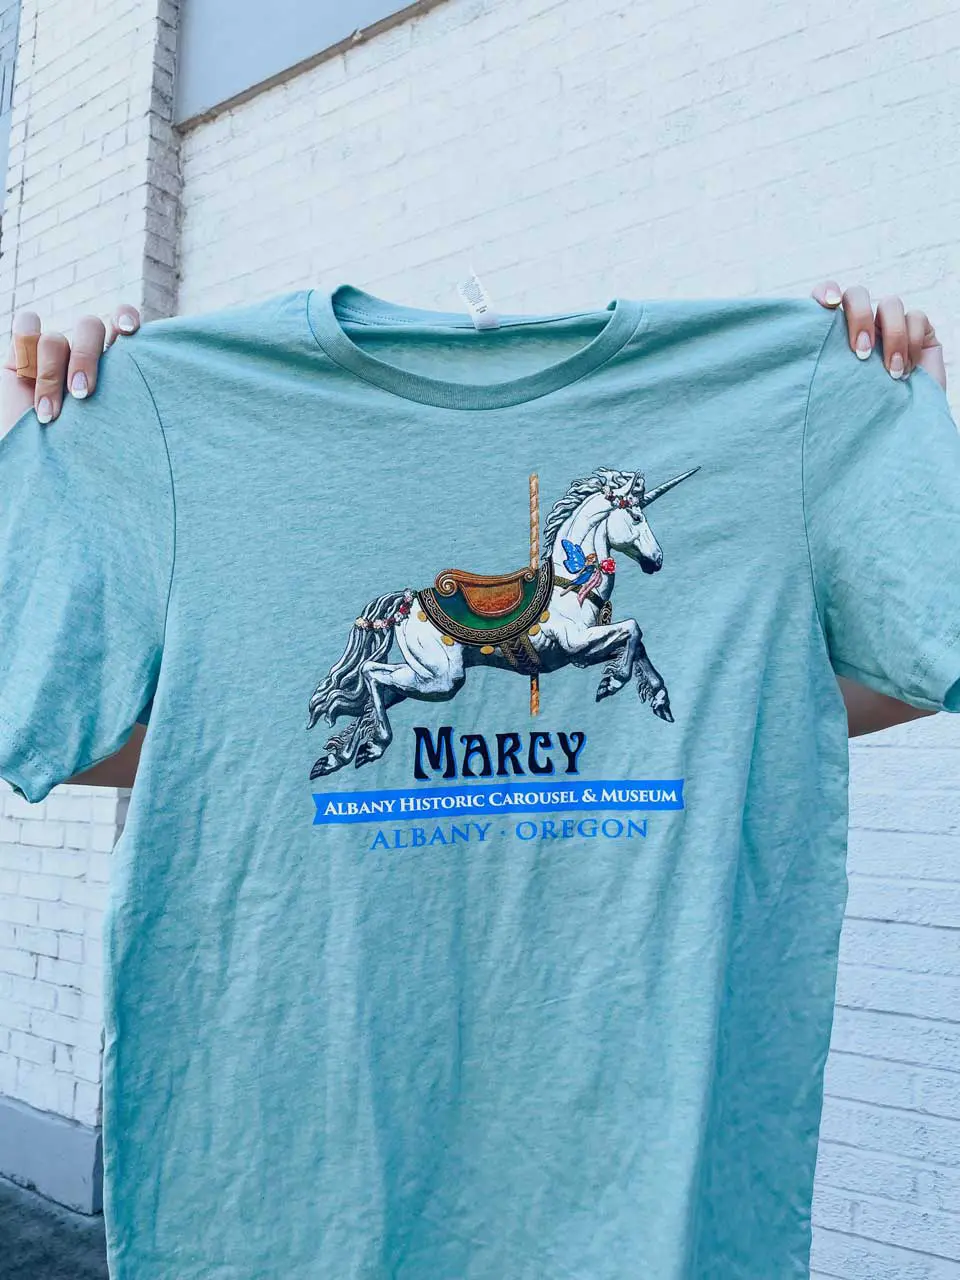 Person holding up a blue t-shirt with a screen printed carousel horse graphic